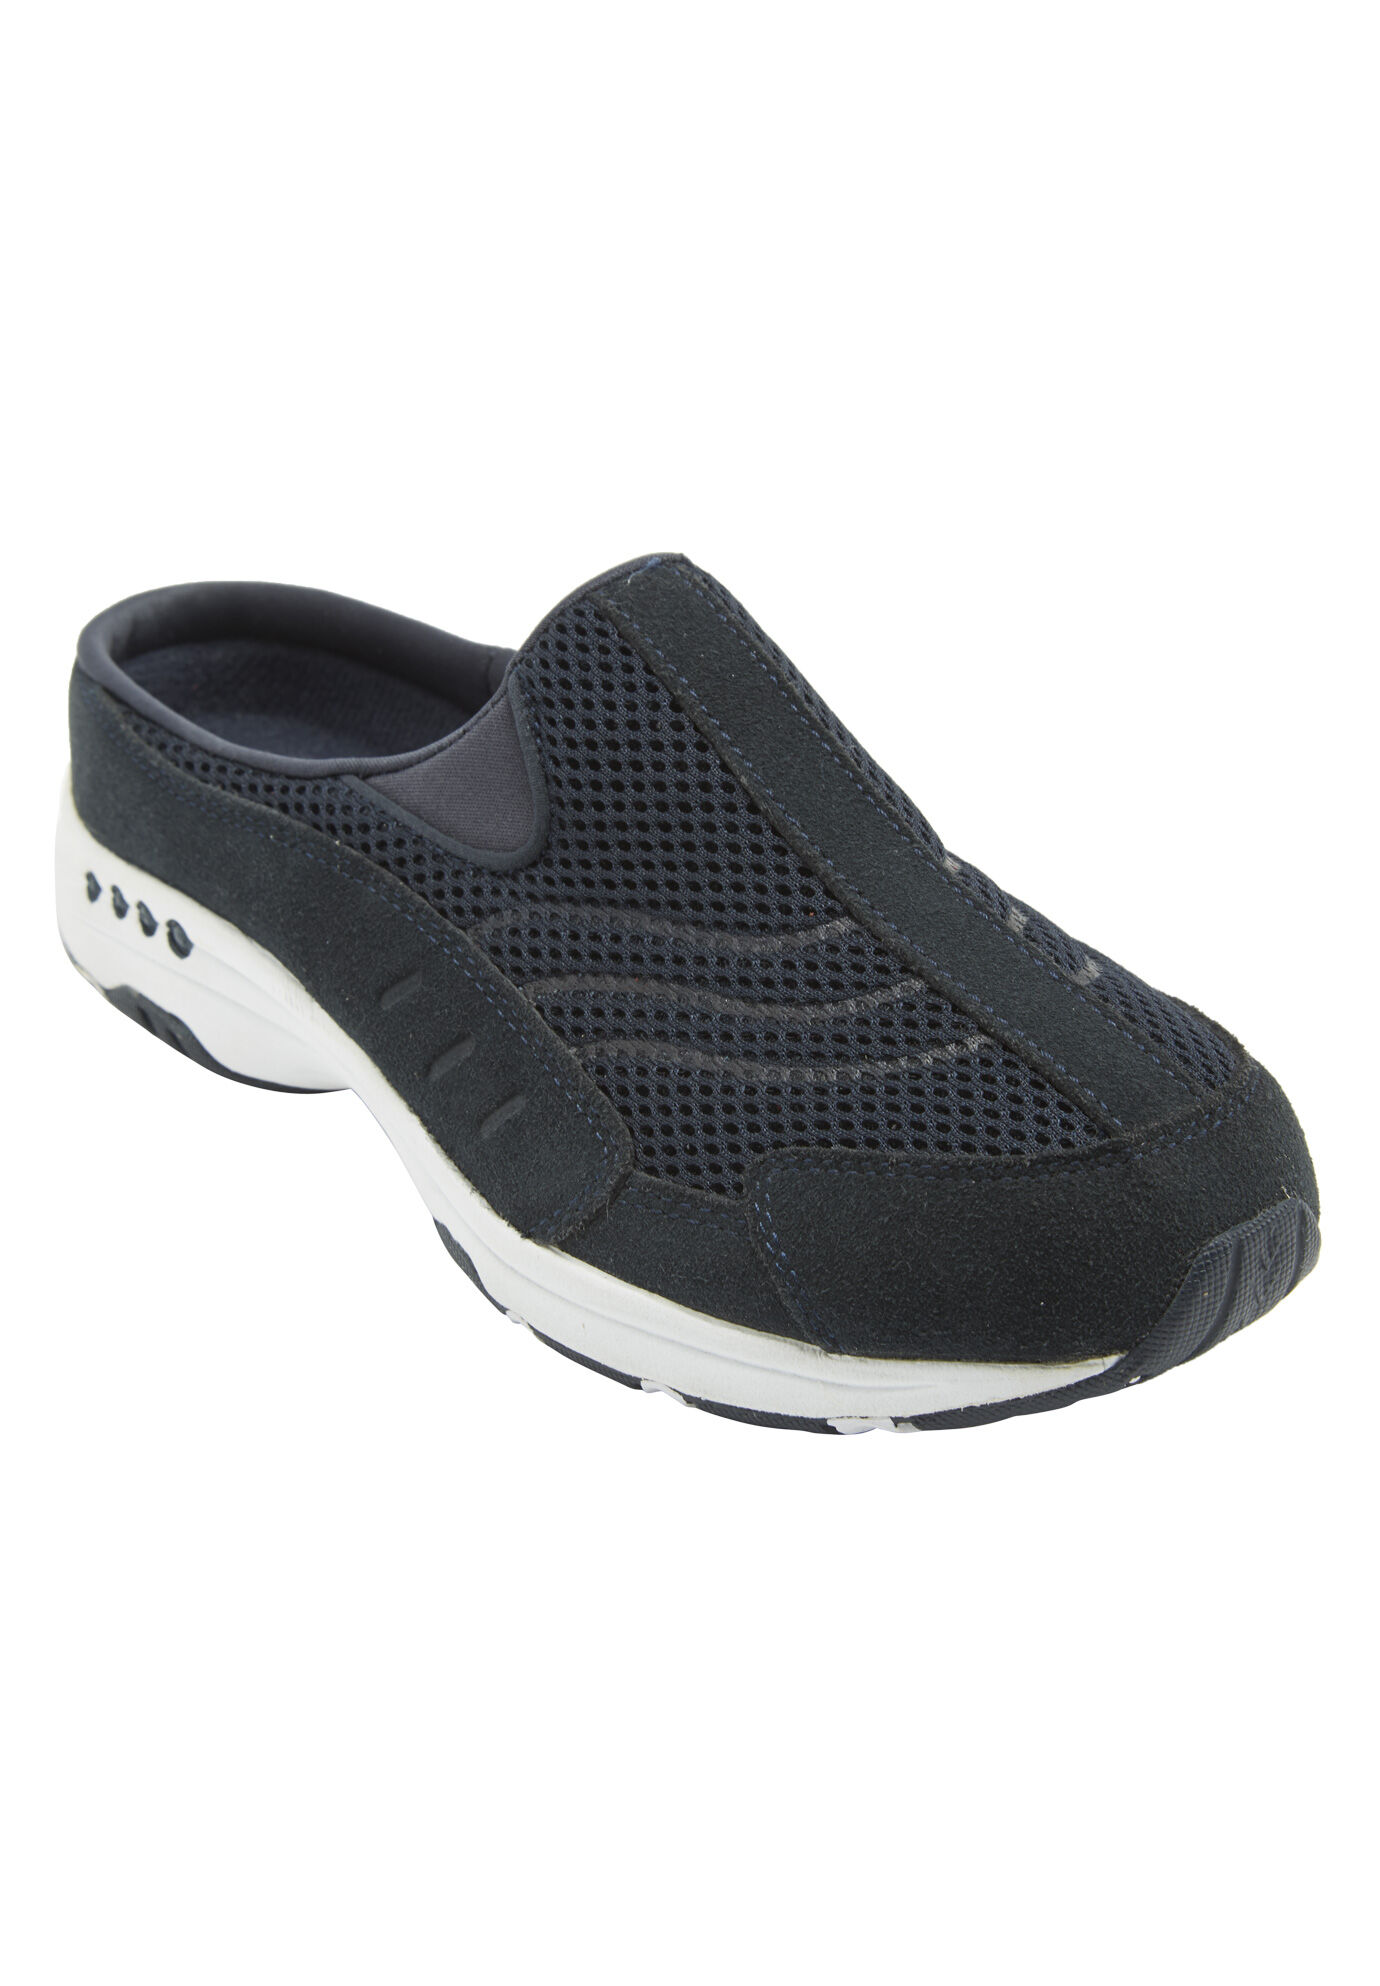 Extra Wide Width Women's The Traveltime Mule by Easy Spirit in Black Mesh (Size 8 1/2 WW)